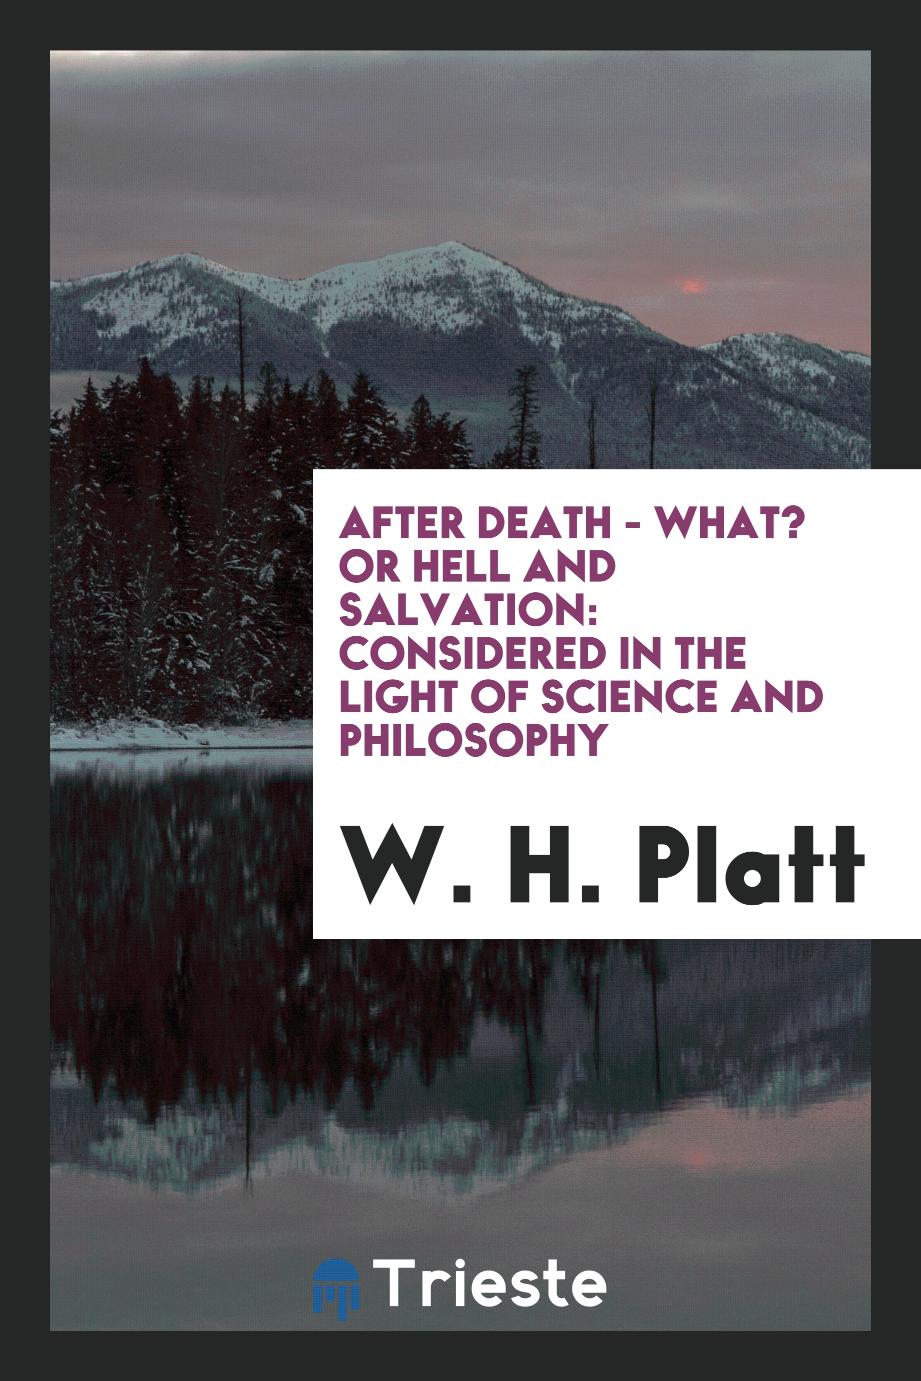 After Death - What? Or Hell and Salvation: Considered in the Light of Science and Philosophy